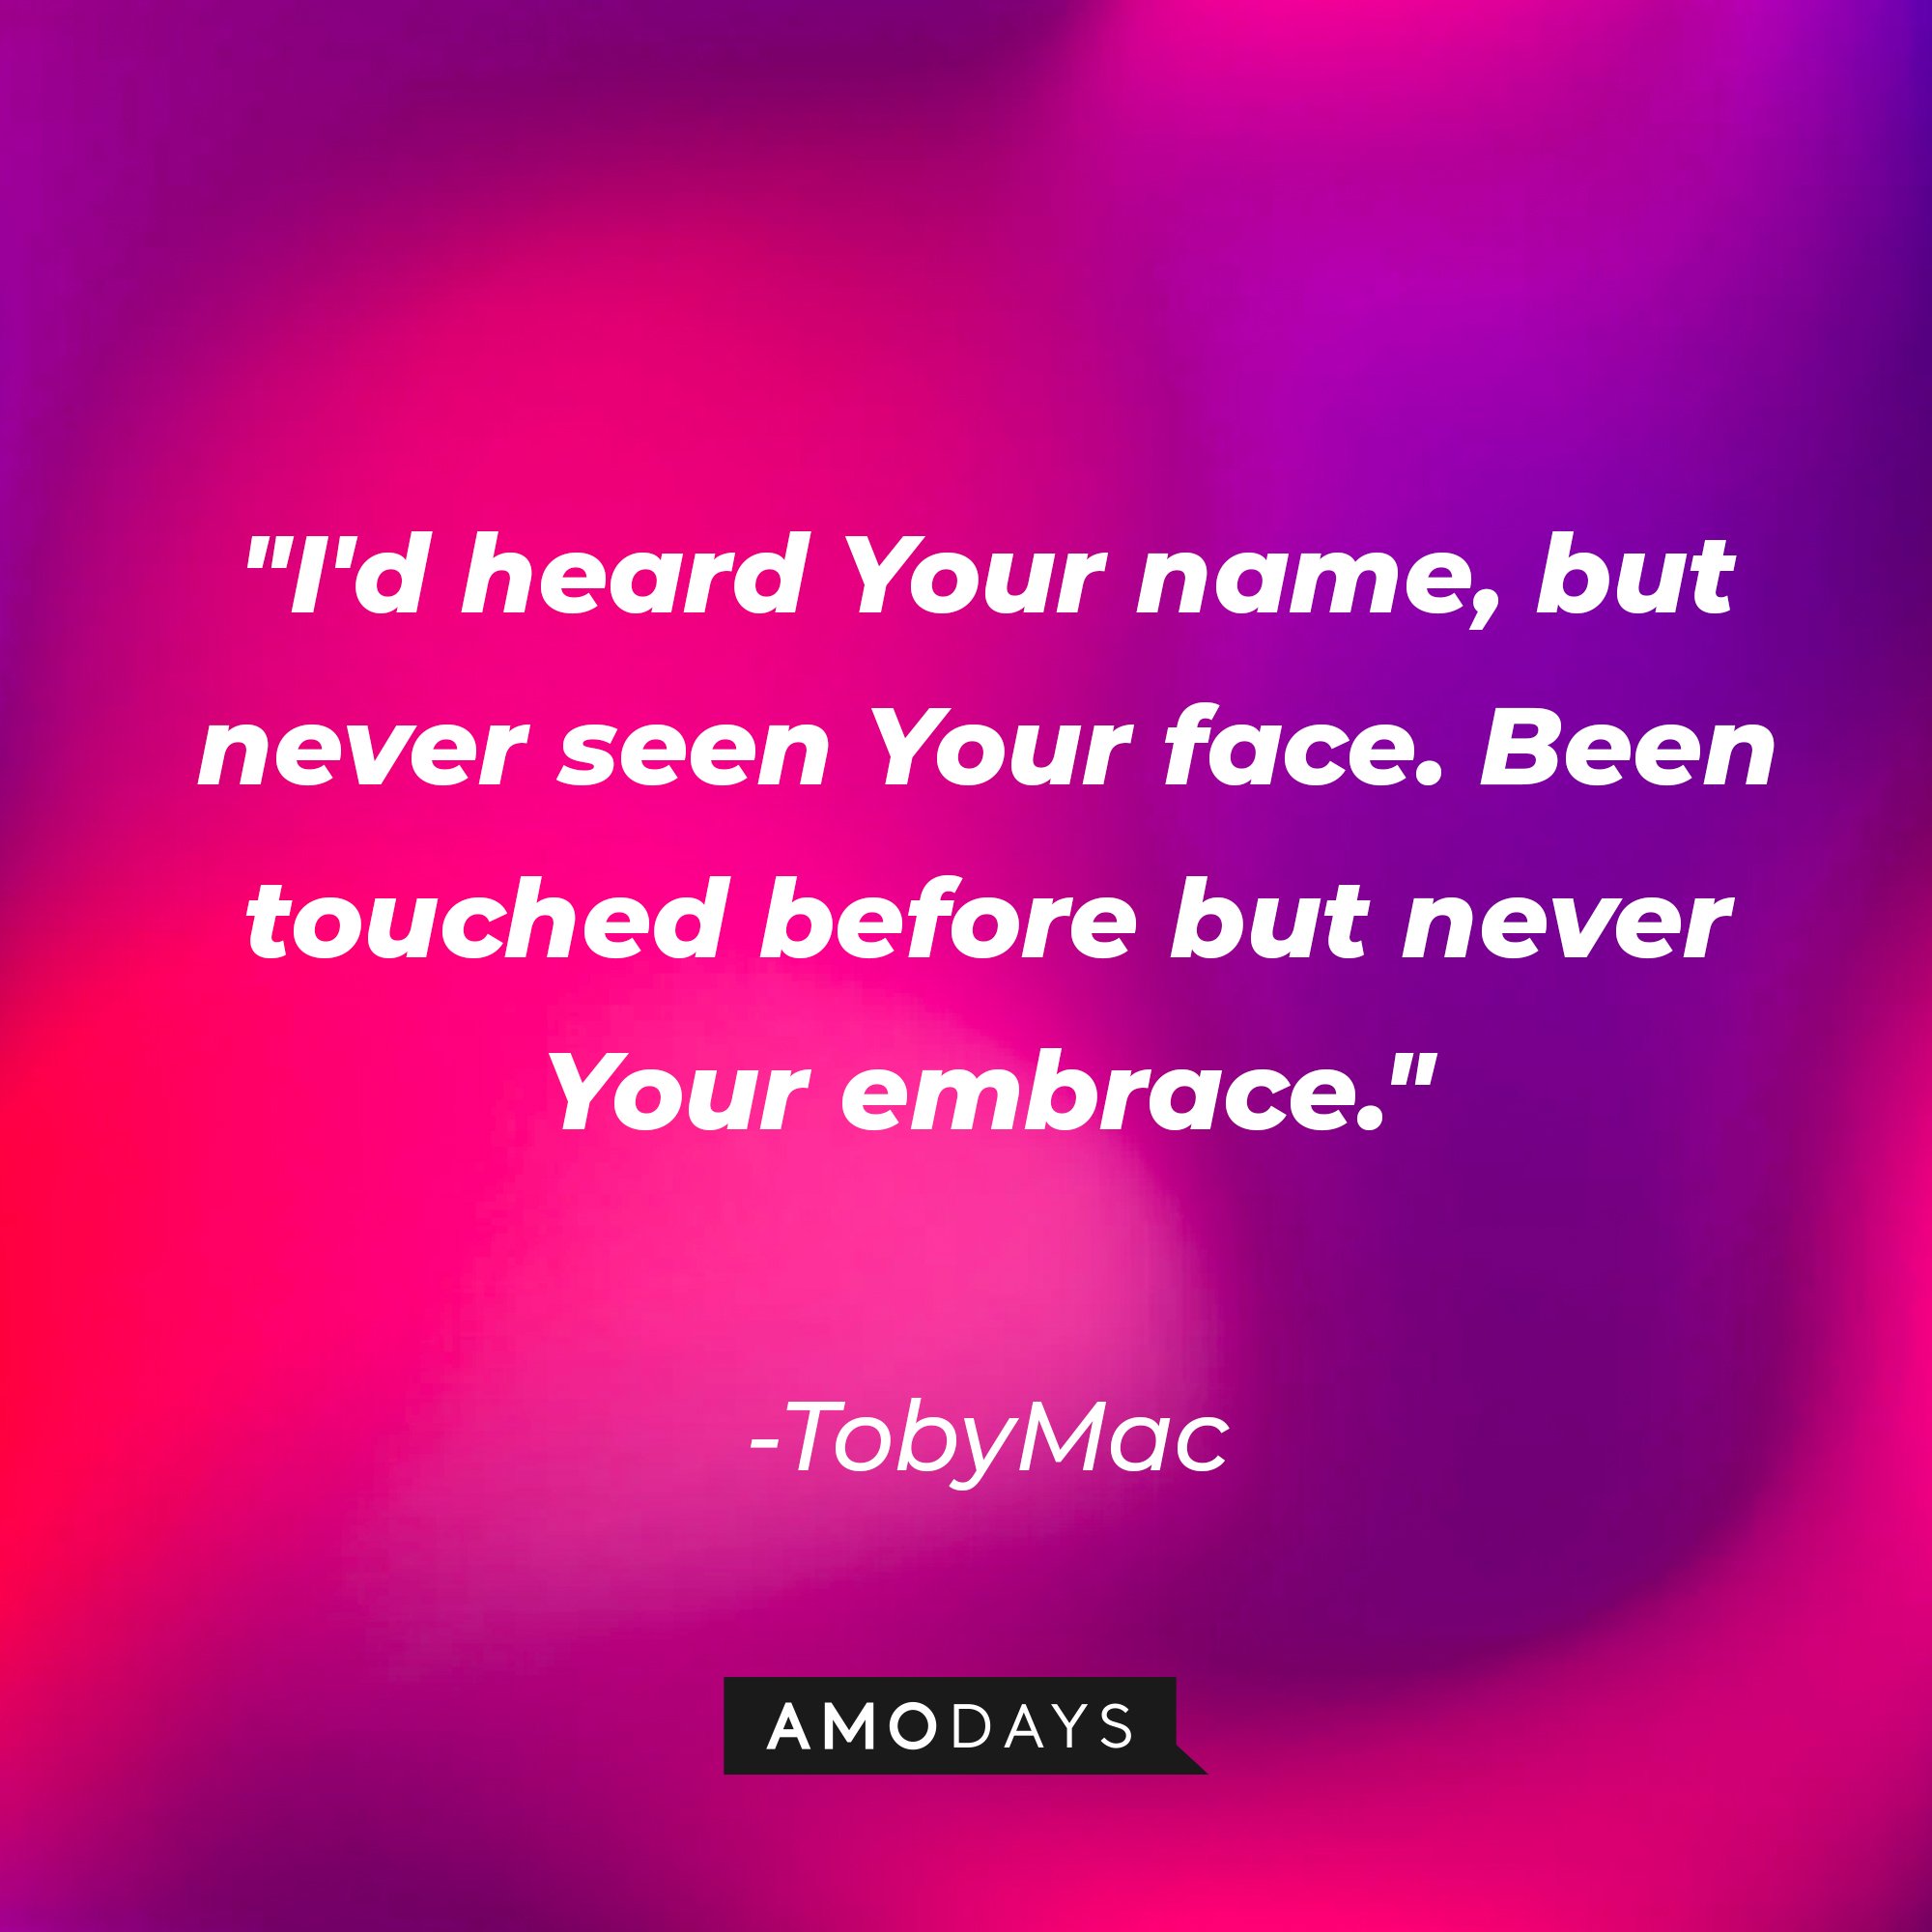 TobyMac's quote: "I'd heard Your name, but never seen Your face. Been touched before but never Your embrace." | Image: AmoDays